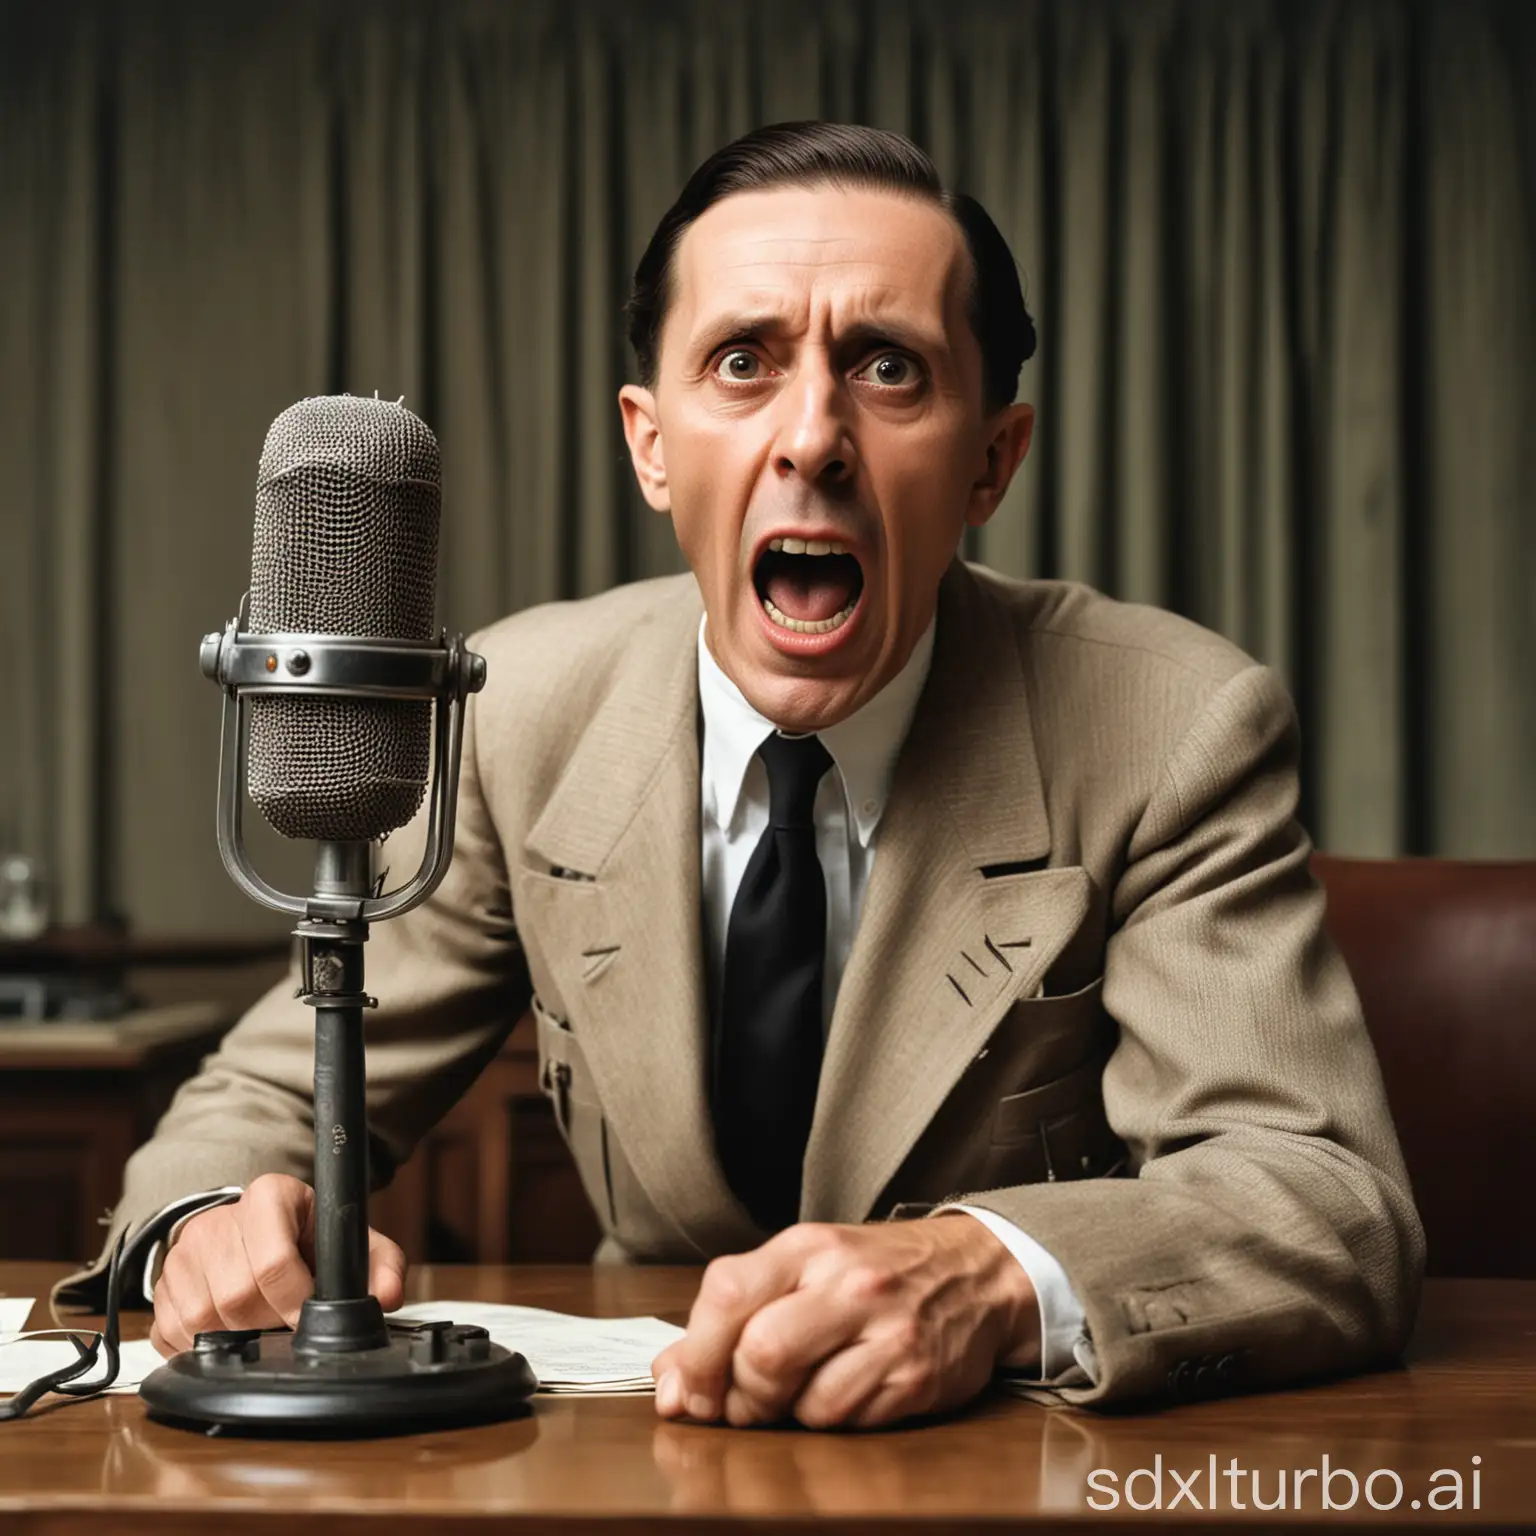 Vintage-Photograph-of-Joseph-Goebbels-Furious-at-a-Radio-Microphone